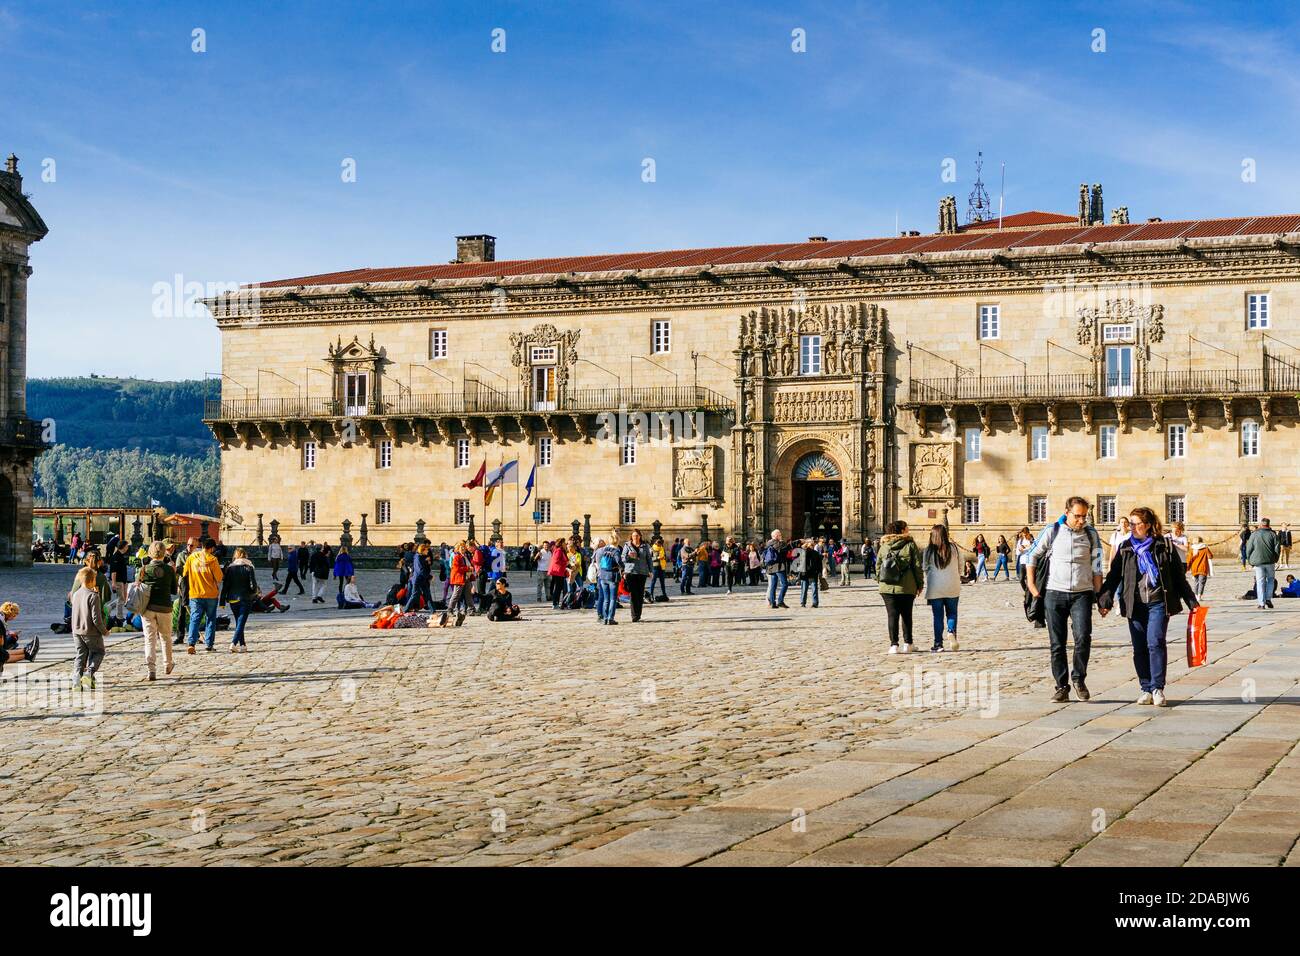 hospital de los Reyes Católicos, usually called the hotel/hostal de los Reyes Católicos and also known historically as the Royal Hospital of Santiago, Stock Photo